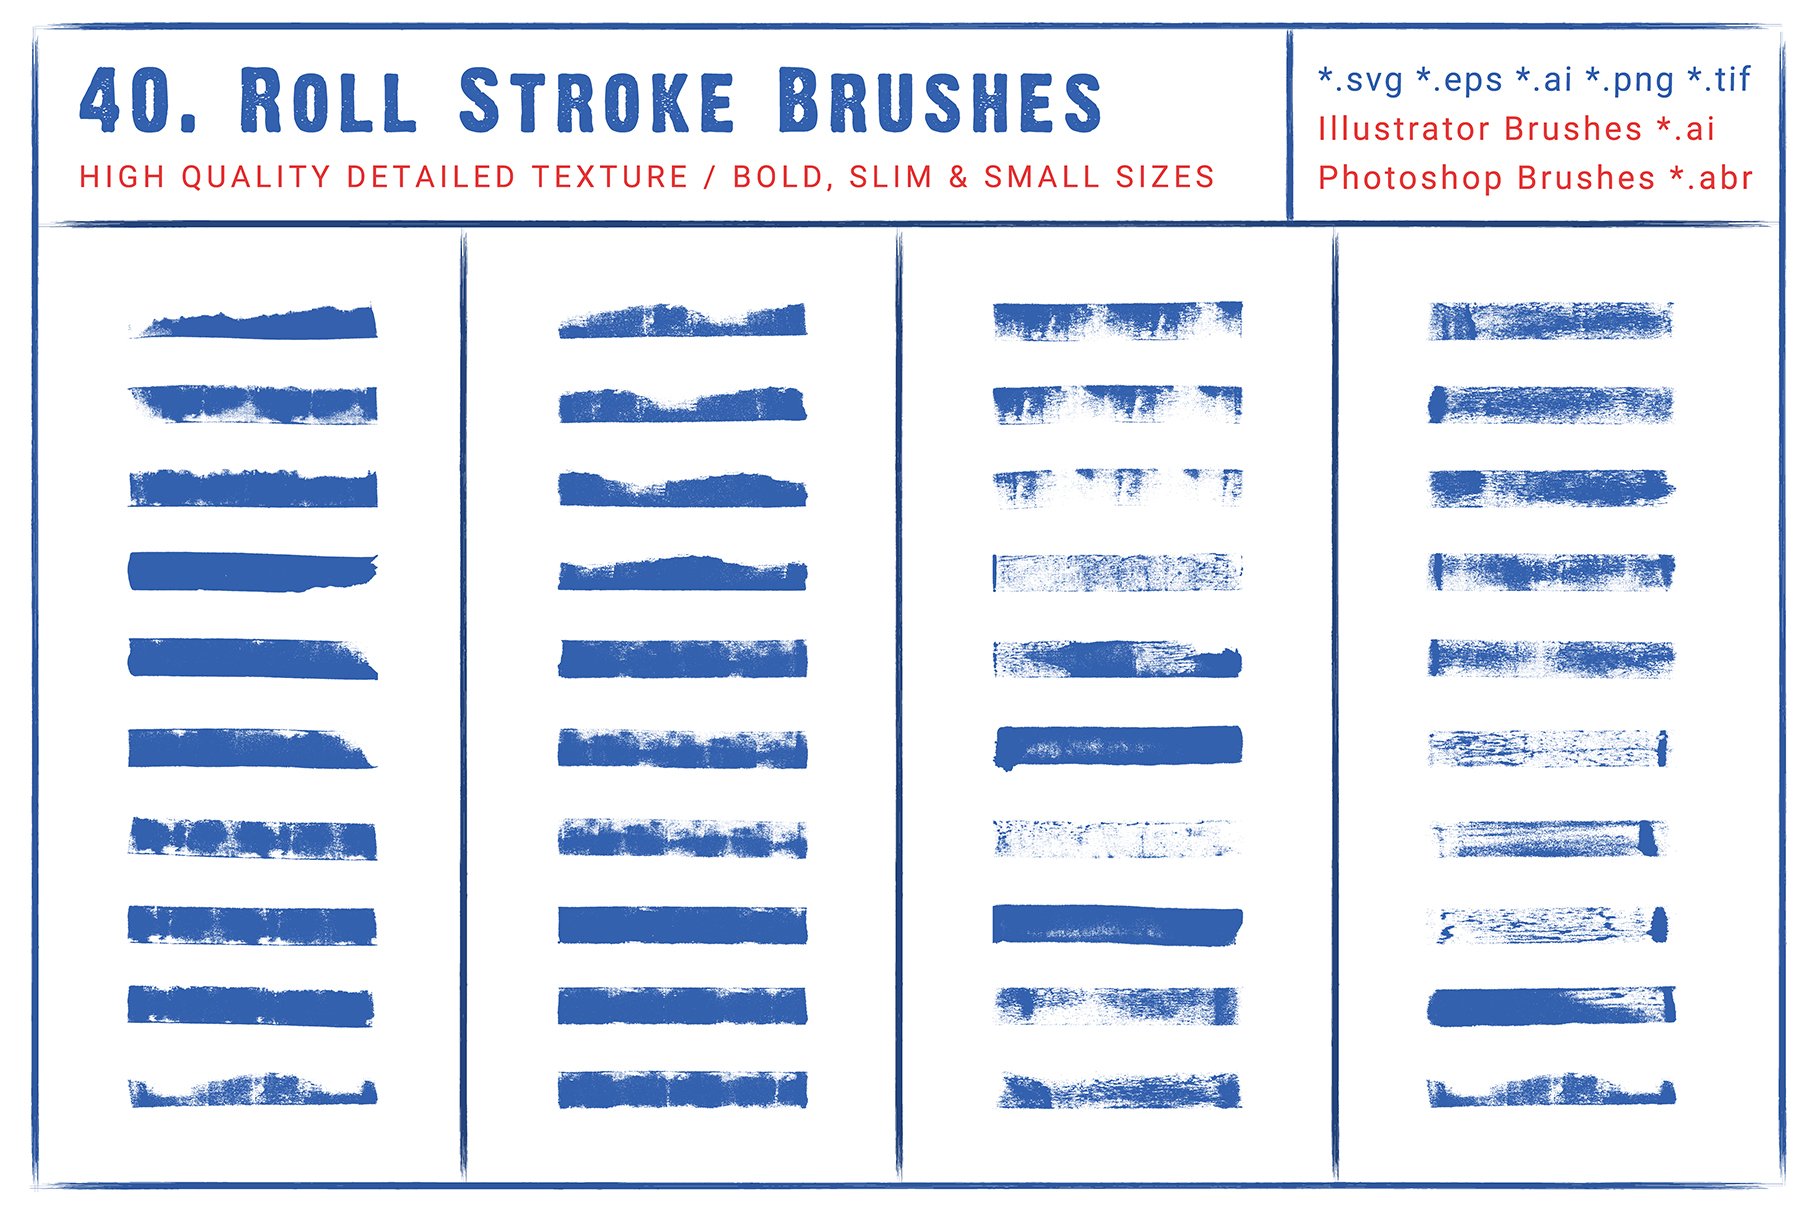 40 Roll Stroke Brushes for Ai & Pspreview image.